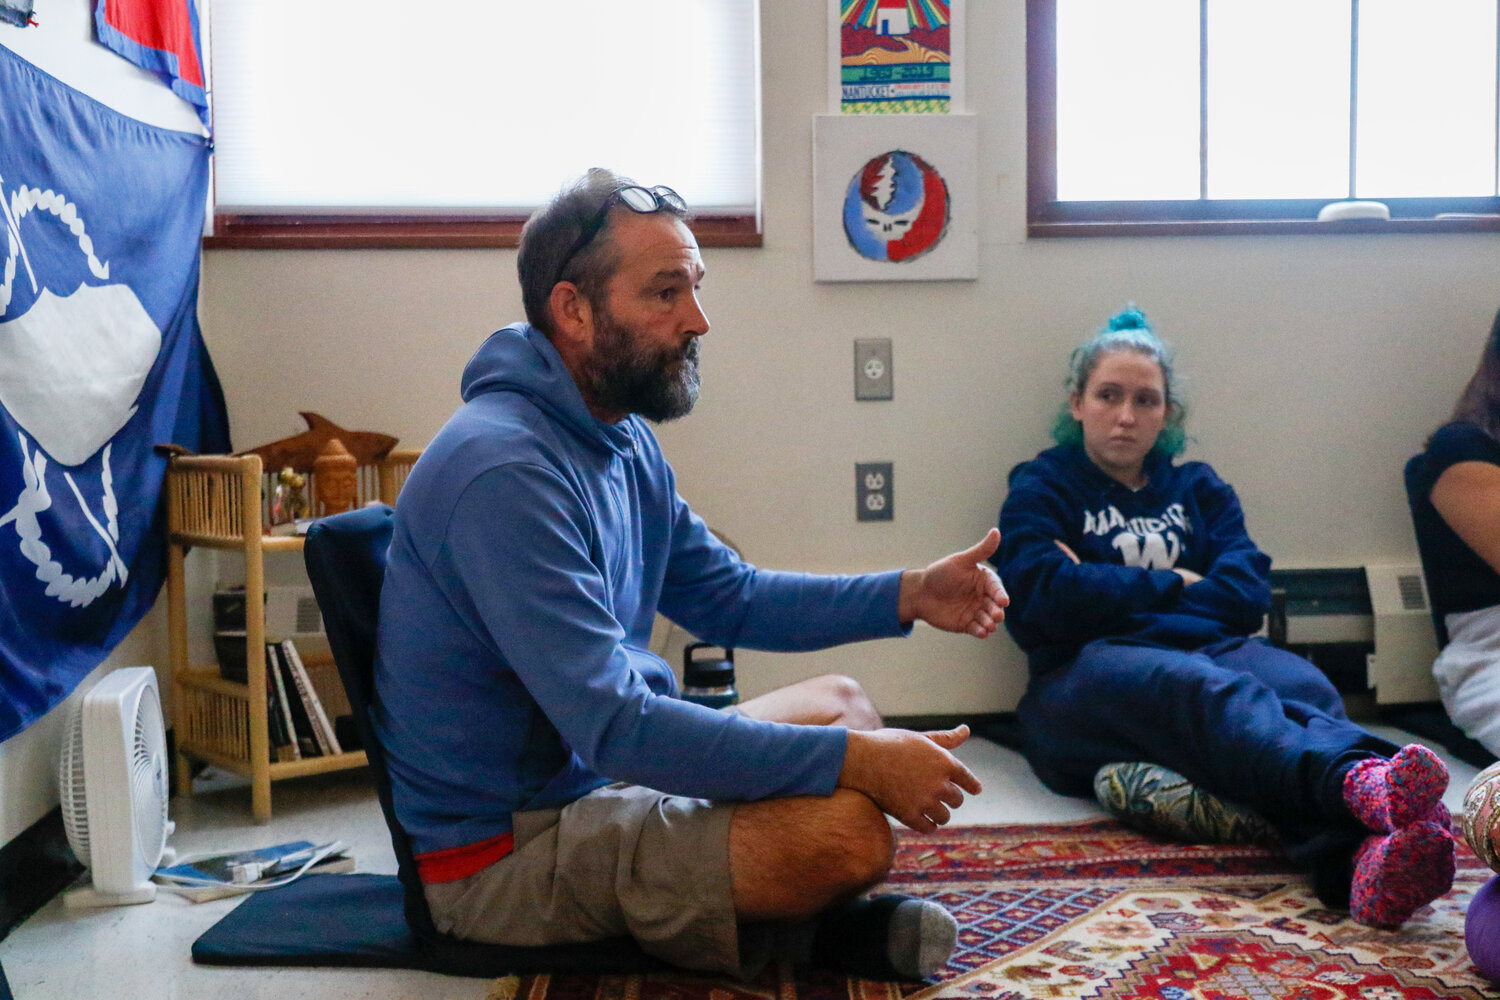 Nantucket High School educational success program coordinator and varsity volleyball coach Andrew Viselli leads a meditation class last month.